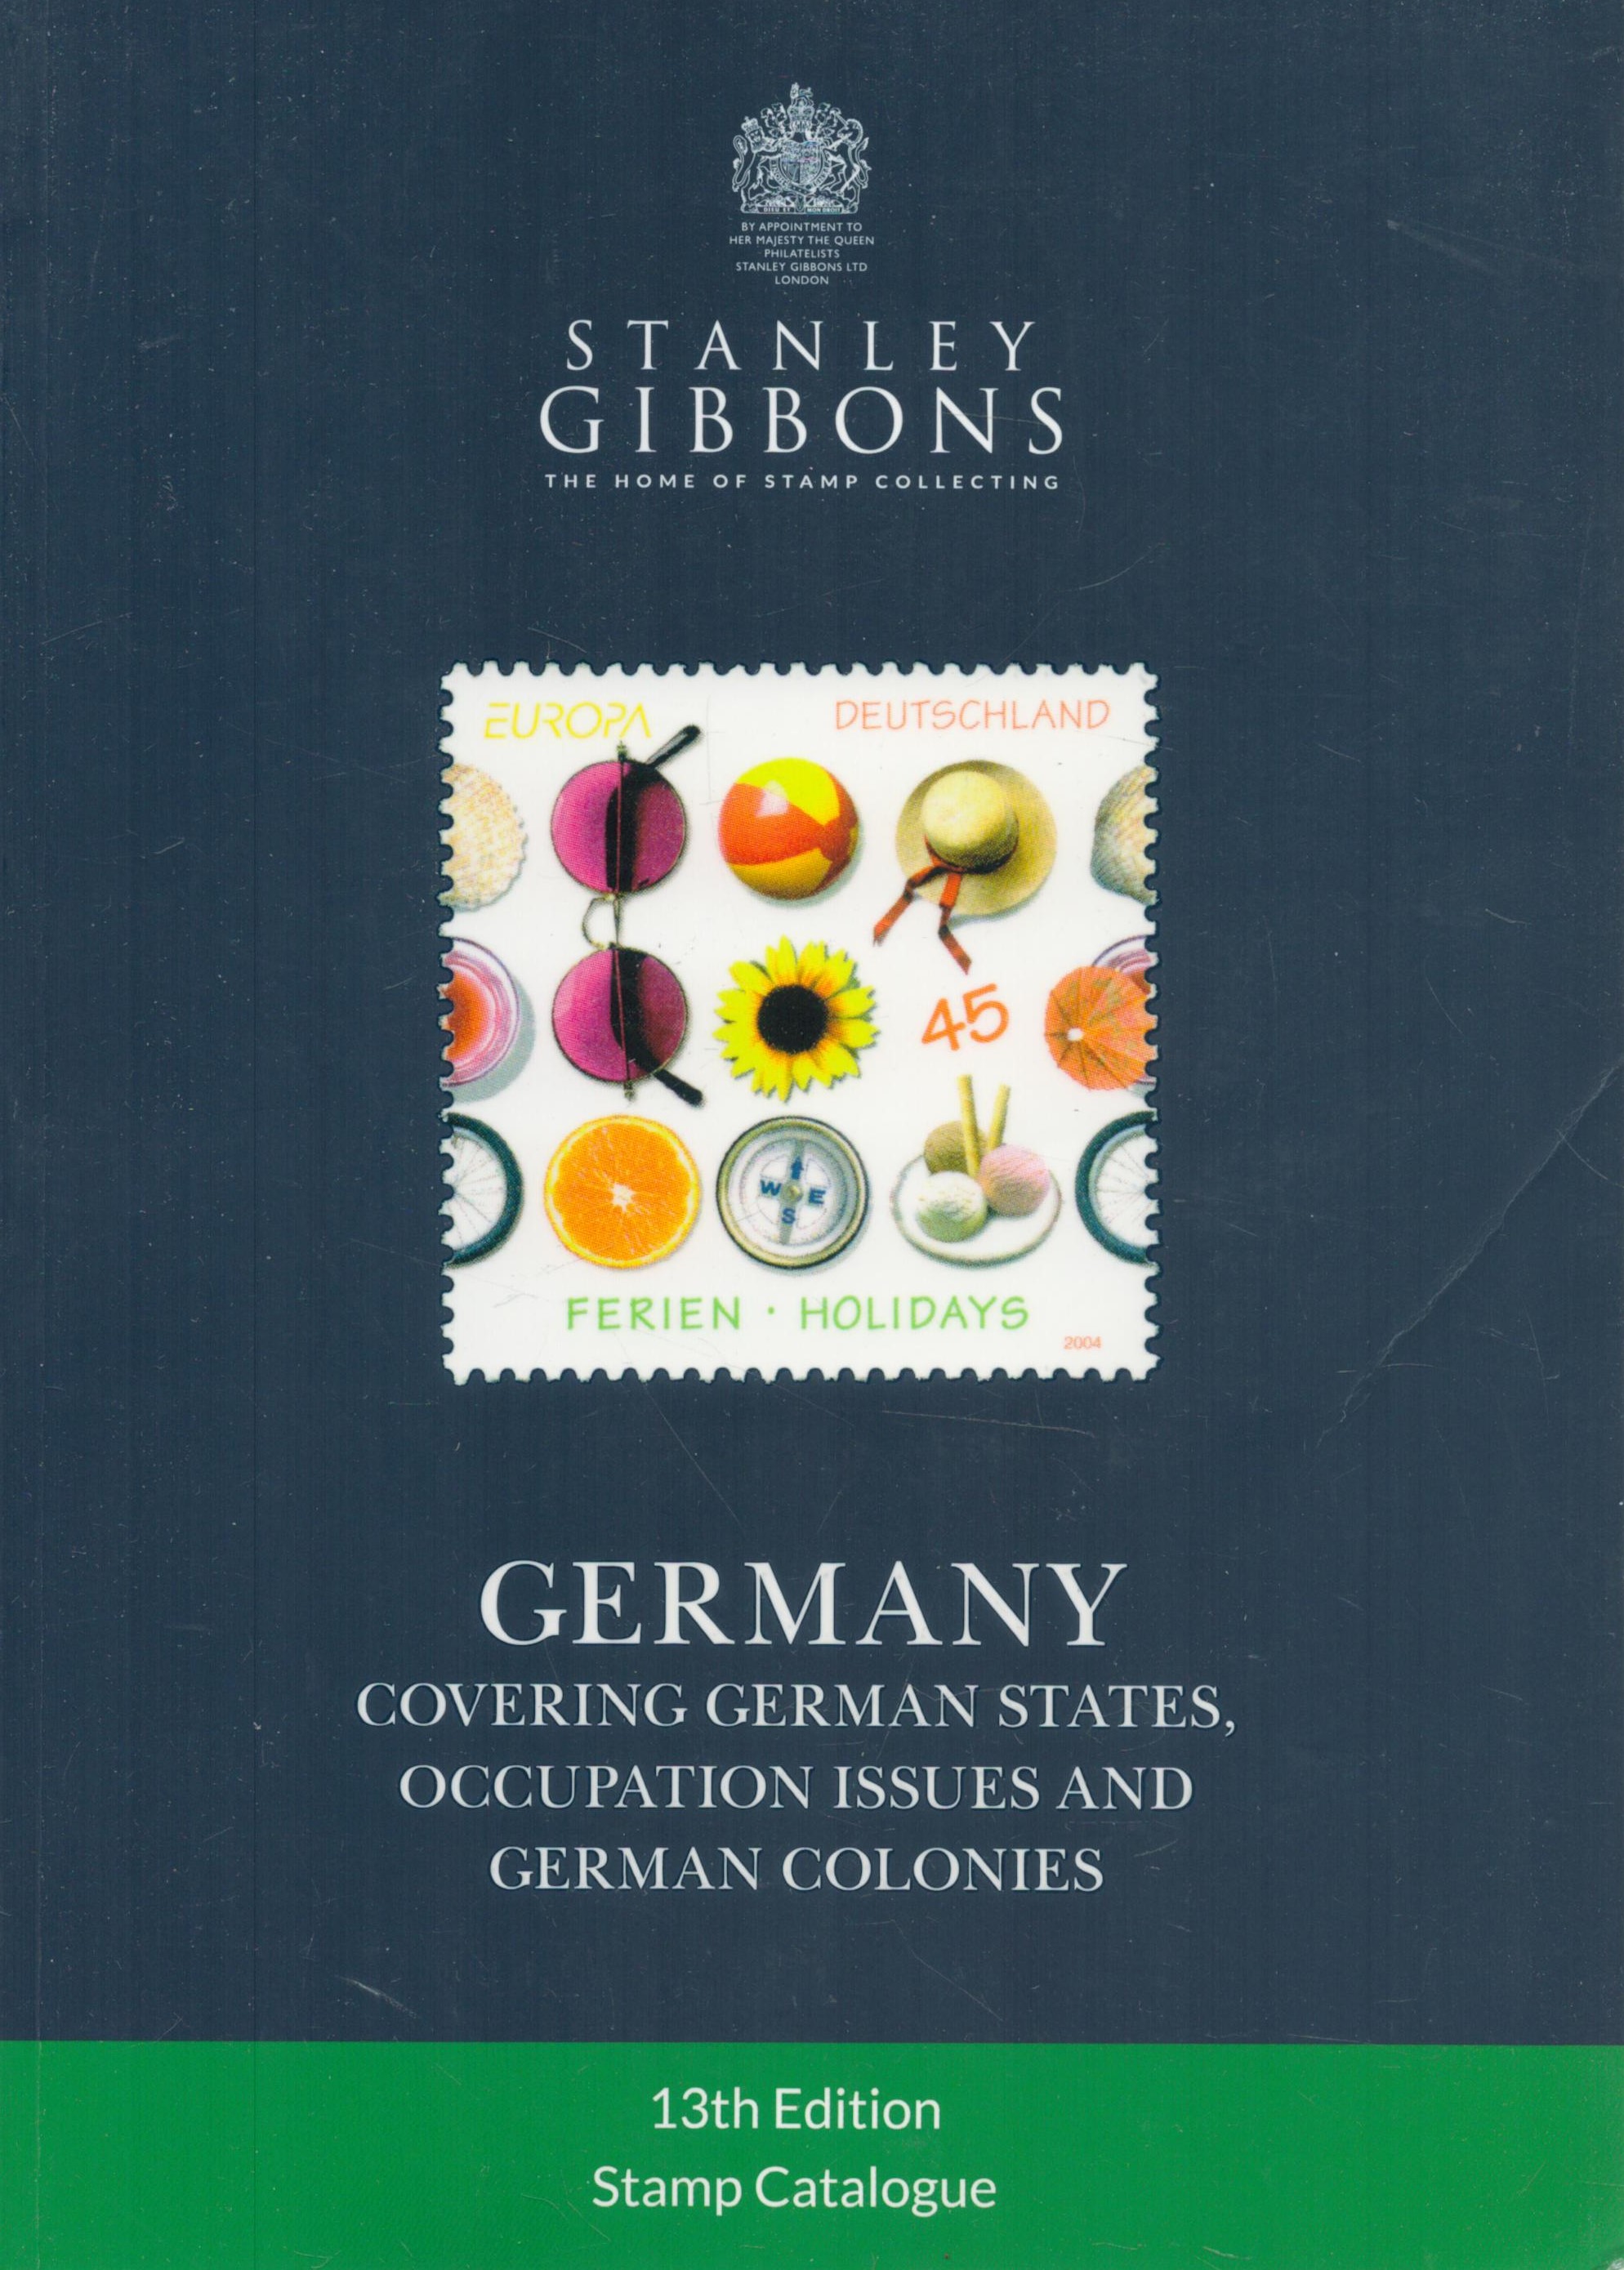 Stanley Gibbons Stamp Catalogue - Germany (covering German States, Occupation Issues and German